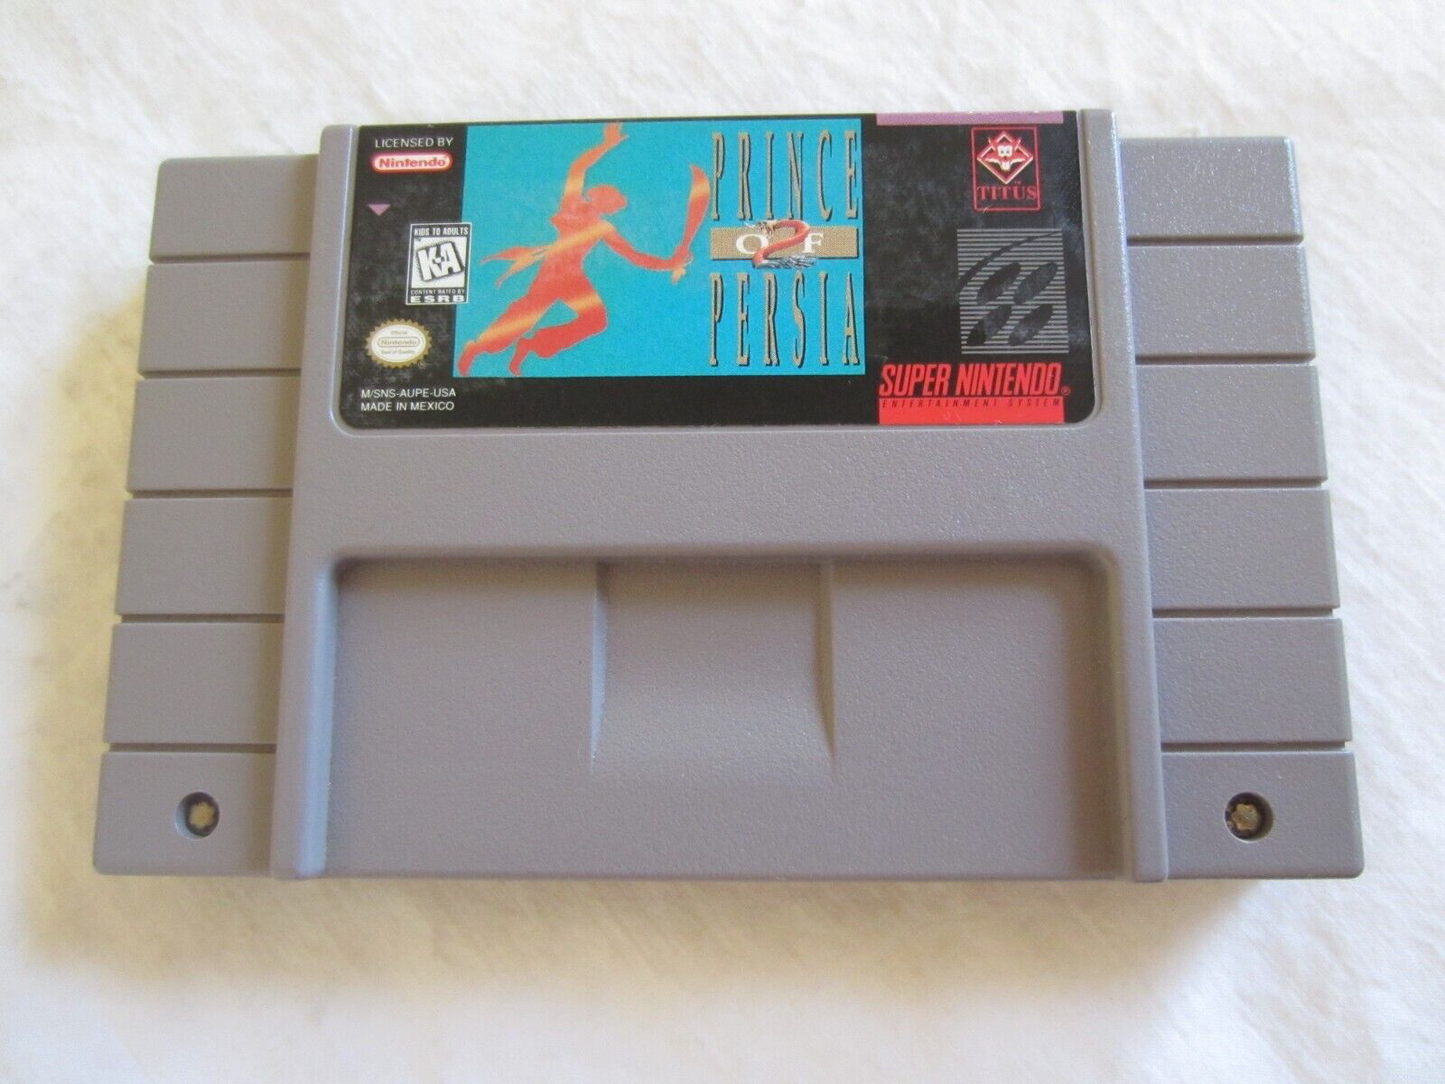 Prince of Persia 2: The Shadow and the Flame - SNES